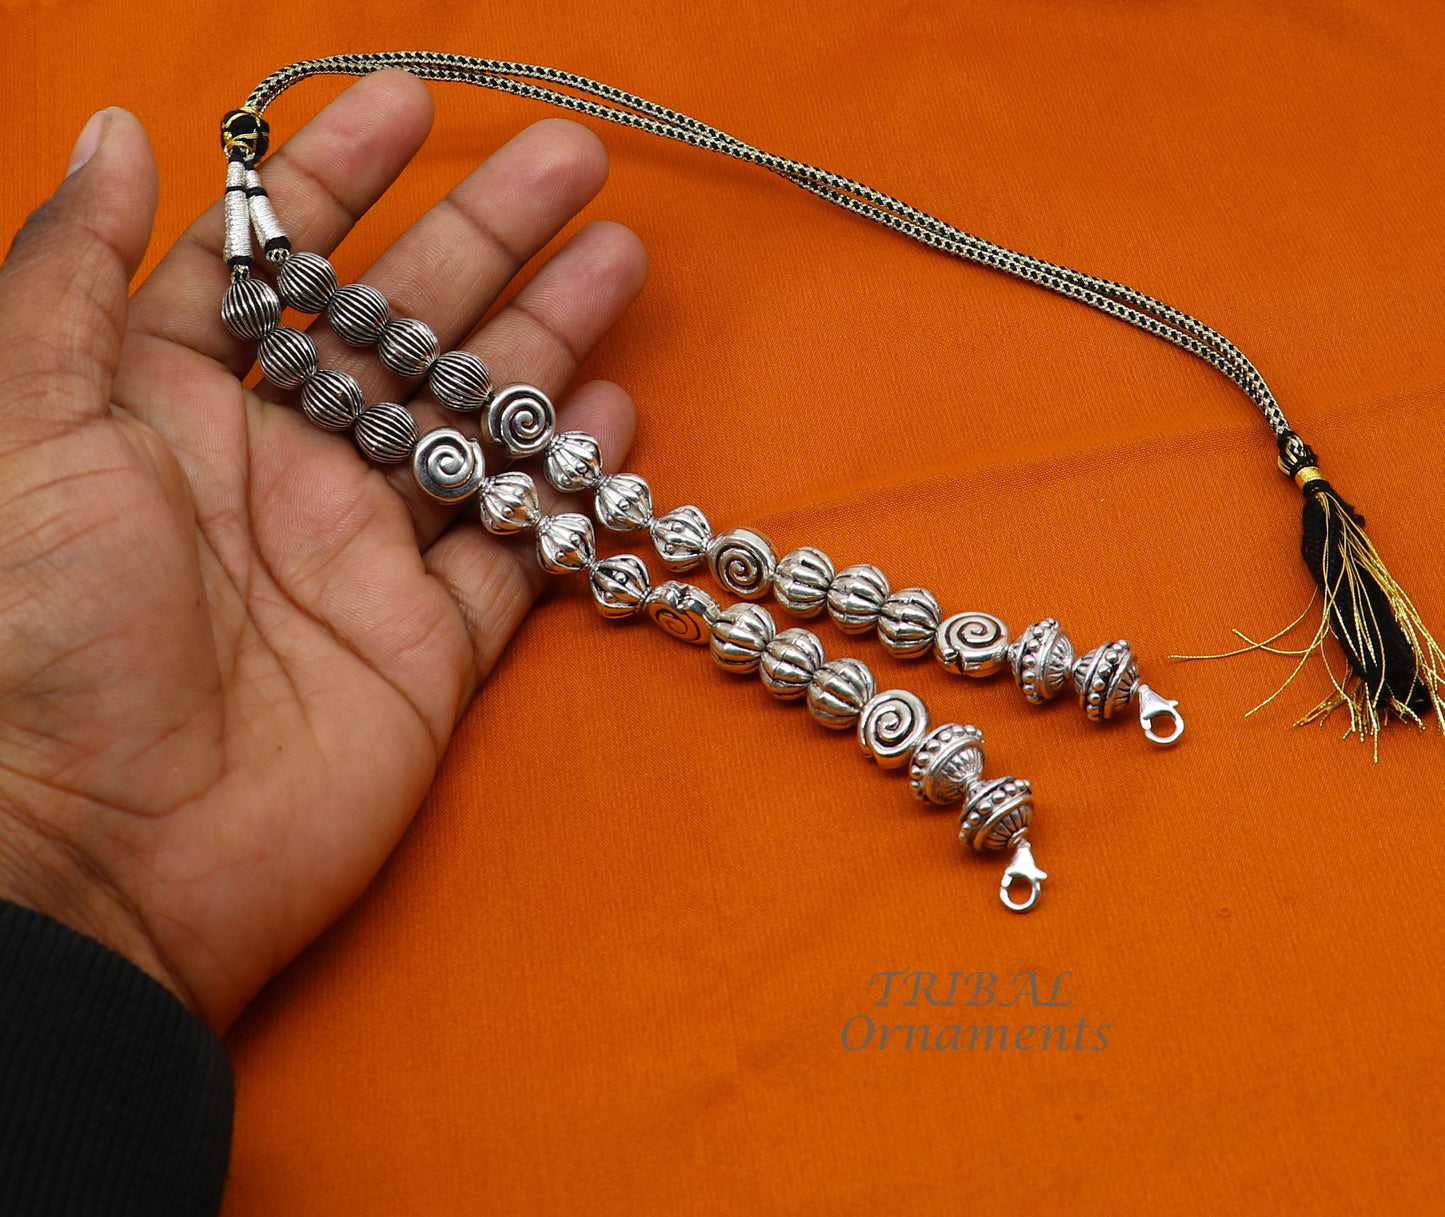 925 sterling silver handmade vintage style beaded adjustable necklace string for pendant or Mangalsutra customized ethnic jewelry set499 - TRIBAL ORNAMENTS